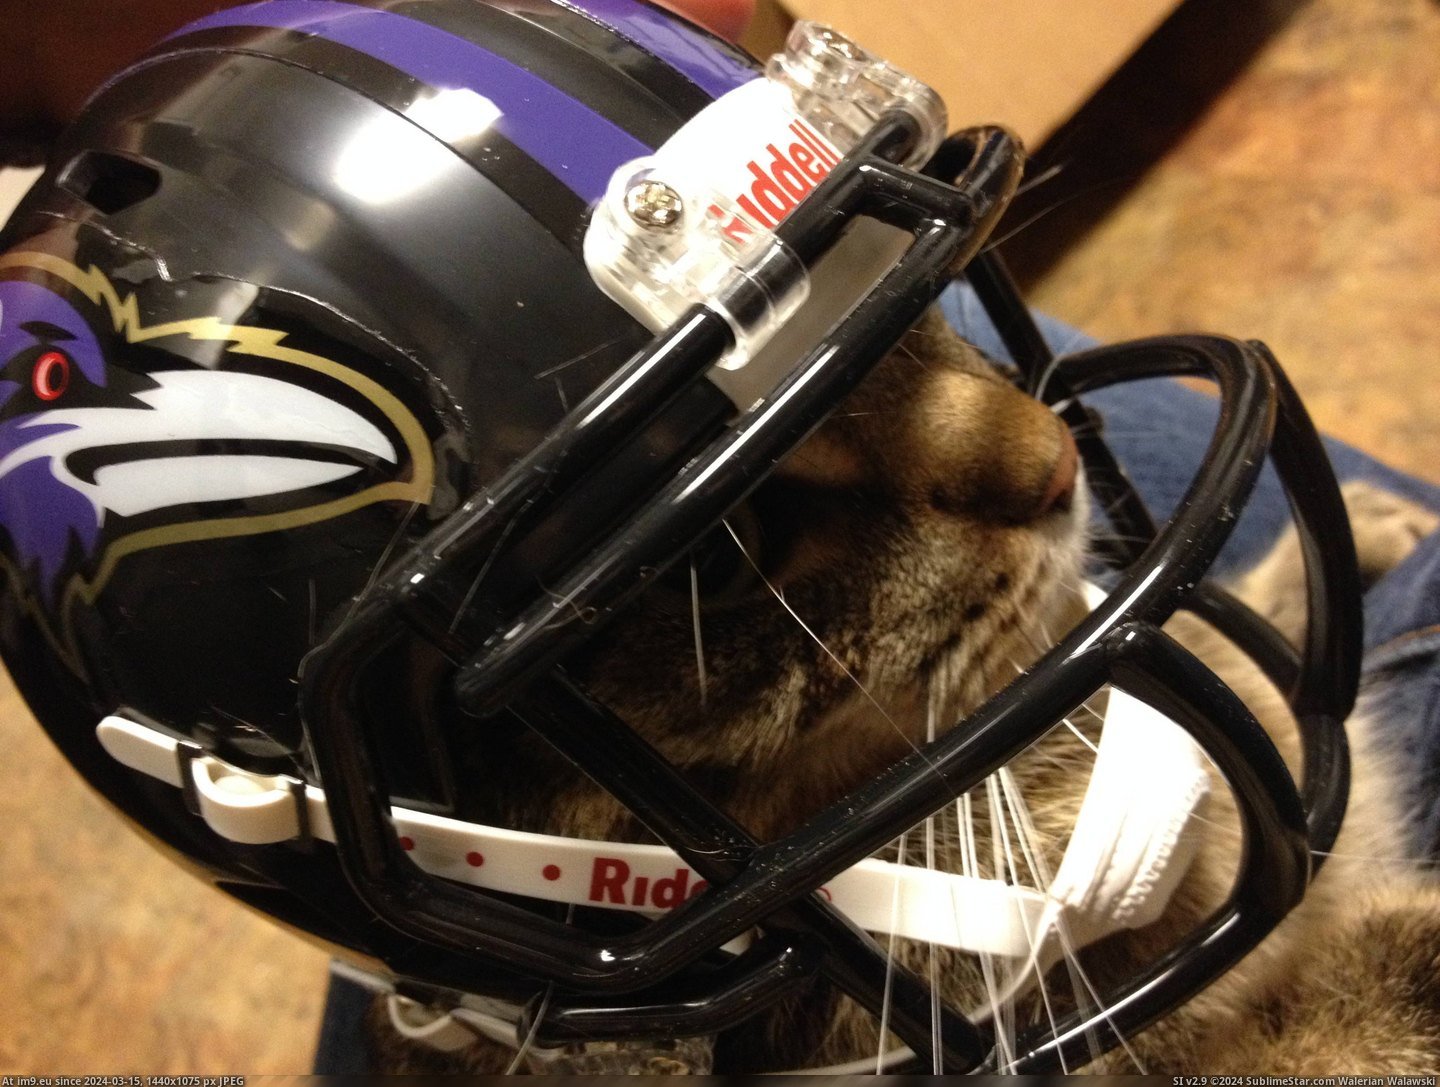 #Was #Tiny #Won #Obvious #Raffle #Football #Step #Helmet [Aww] Won a tiny football helmet in a raffle. This was the obvious next step. Pic. (Image of album My r/AWW favs))